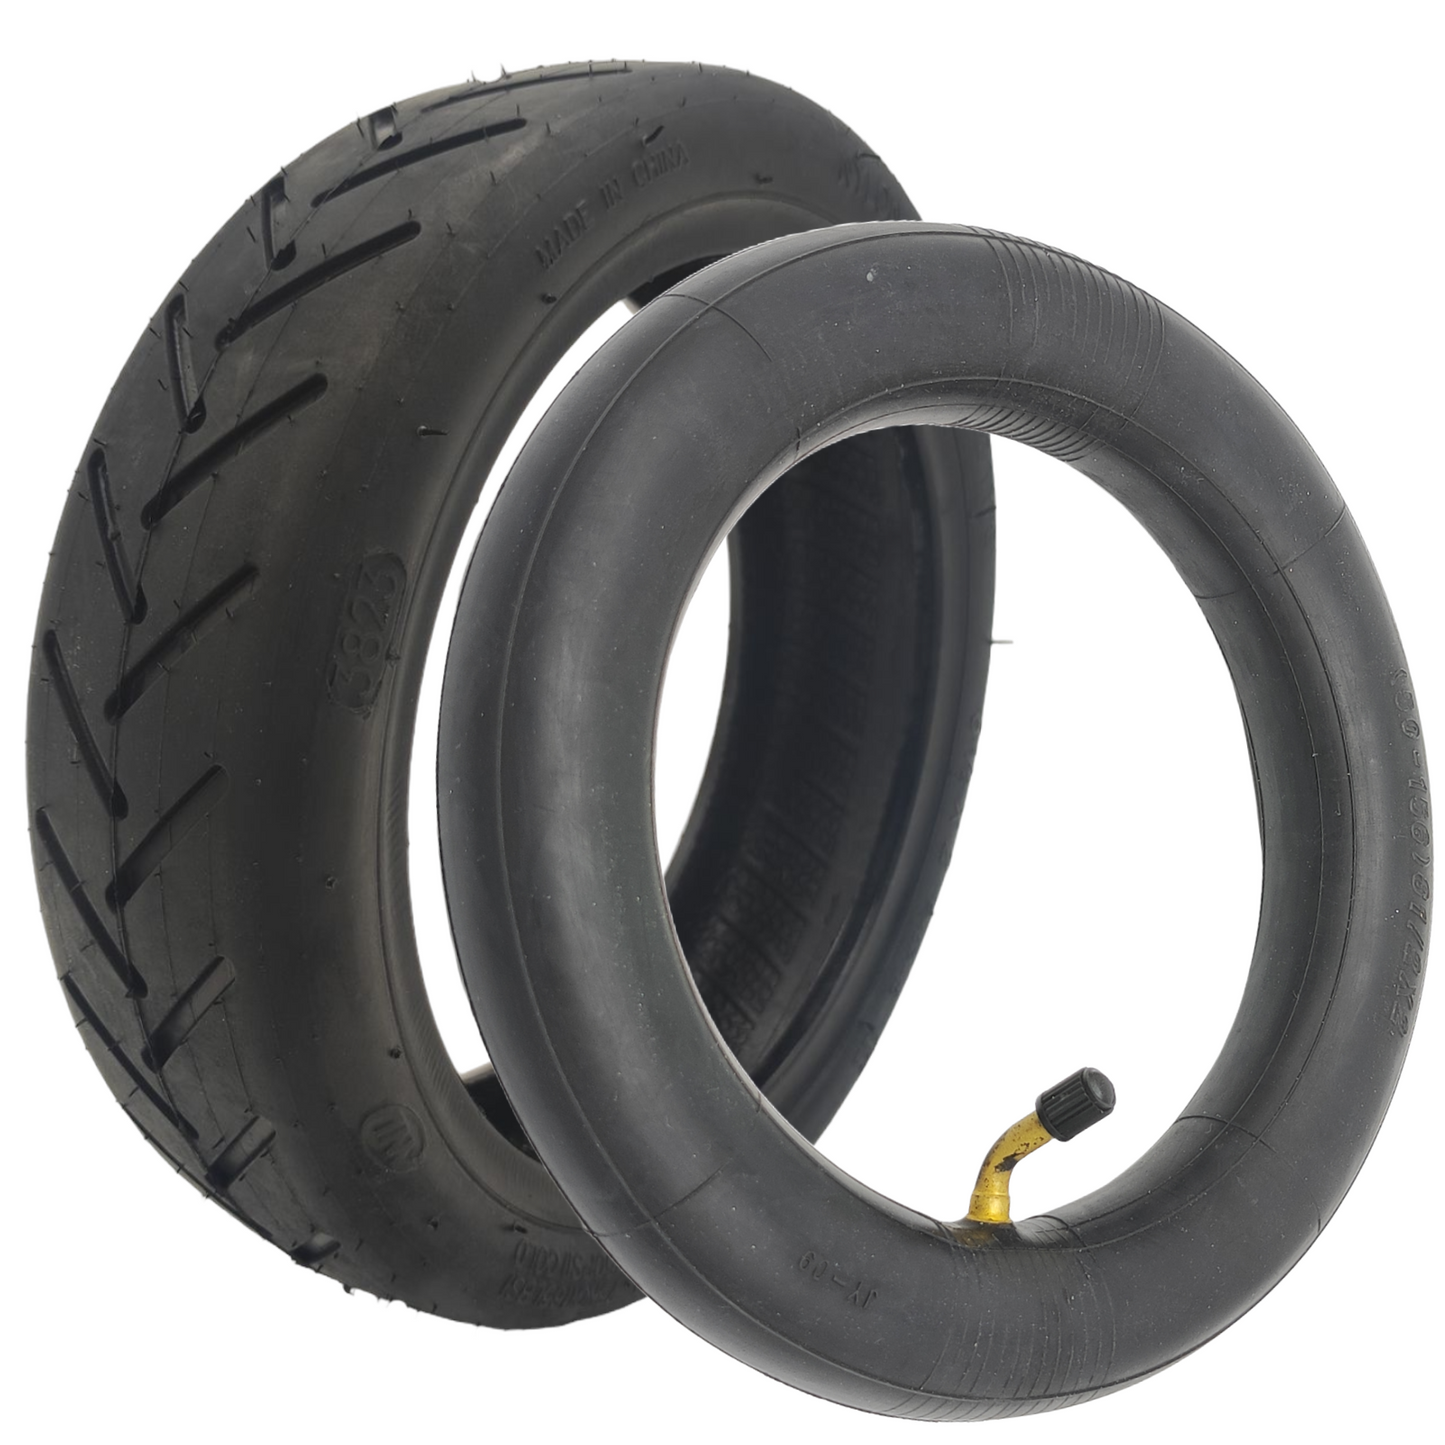 SoFlow SO4 tire set 8.5x2 inches with angled tube